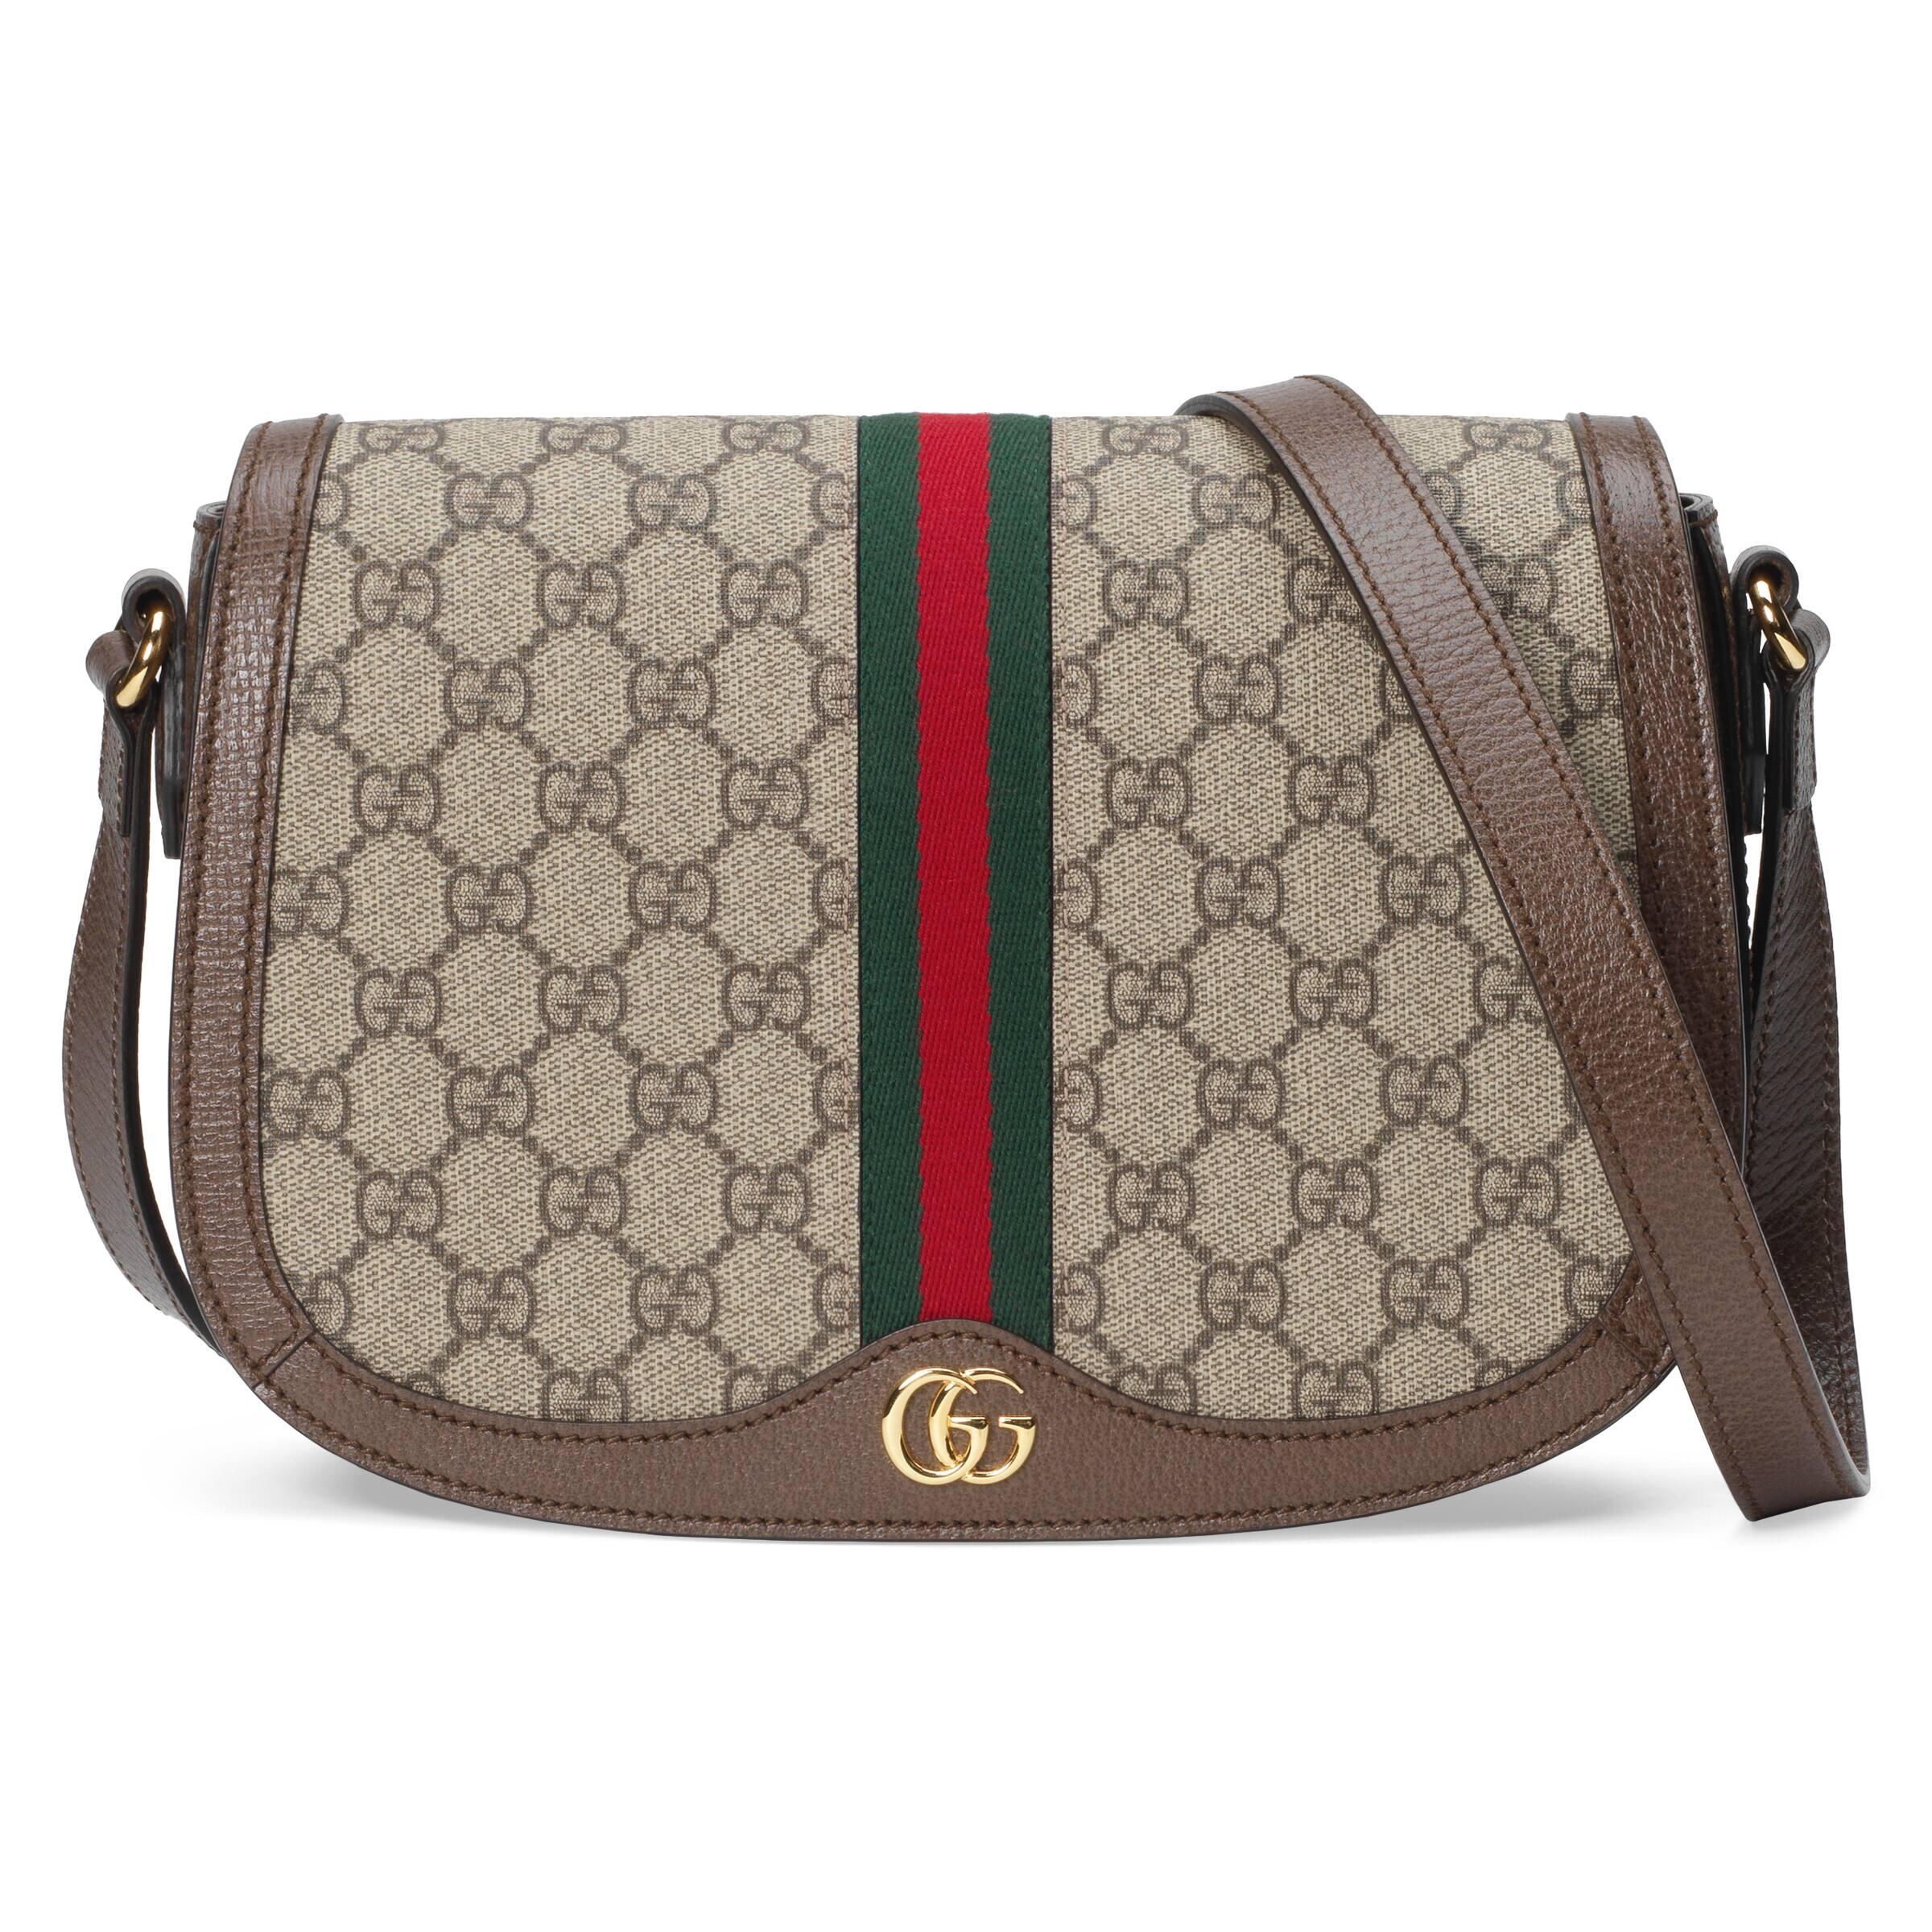 GUCCI #OPHIDIA GG SMALL SHOULDER BAG 980 #WOMEN #SS19 For more Gucci   #gucciophi…